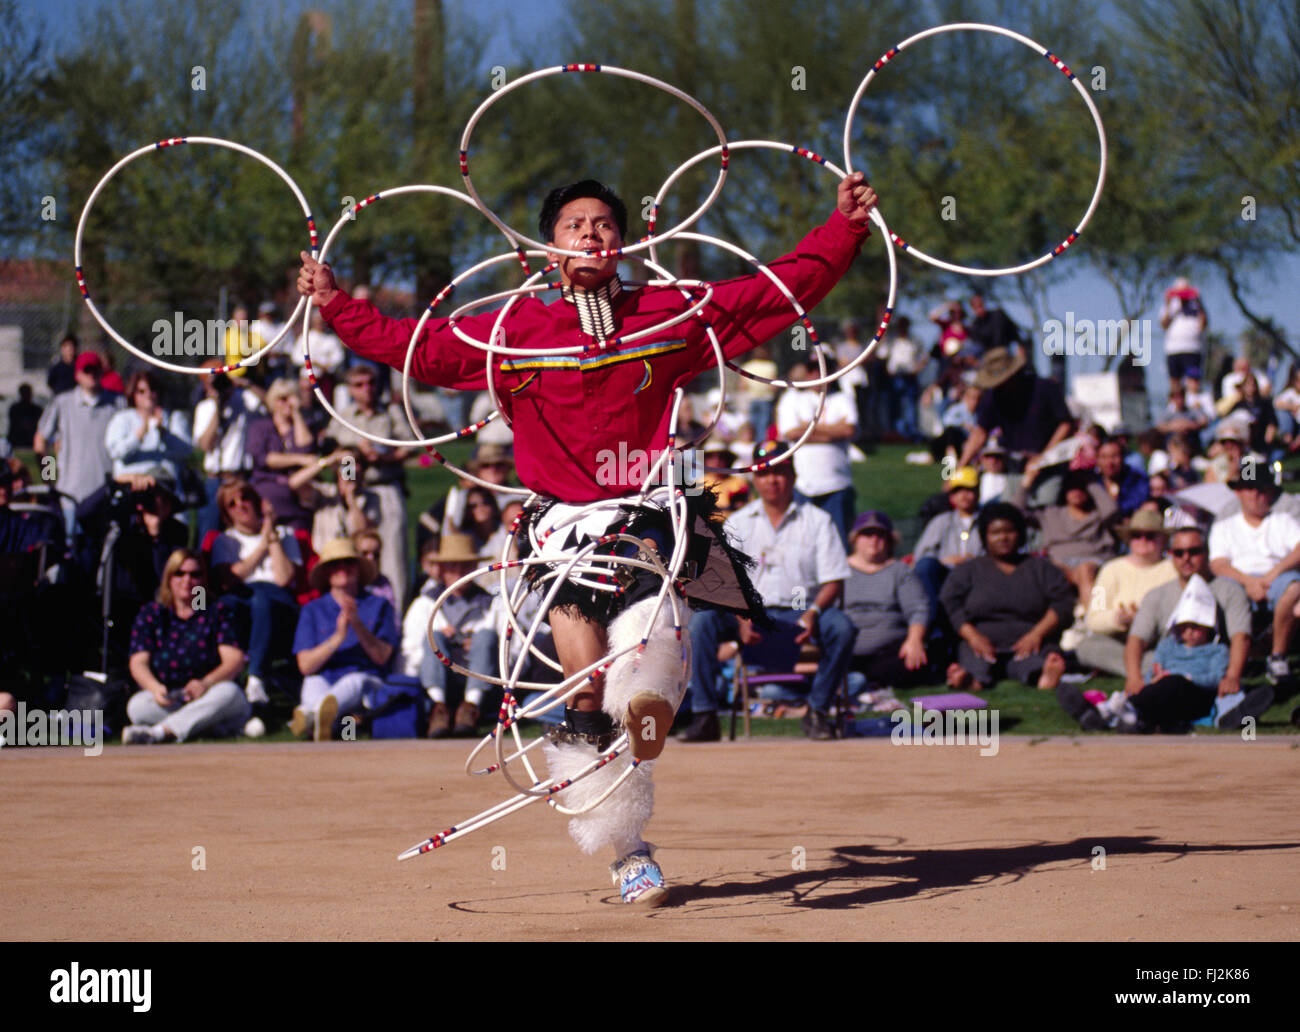 Many tribes compete at the WORLD CHAMPIONSHIP HOOP DANCE CONTEST - HEARD MUSEUM, PHONEIX, ARIZONA Stock Photo